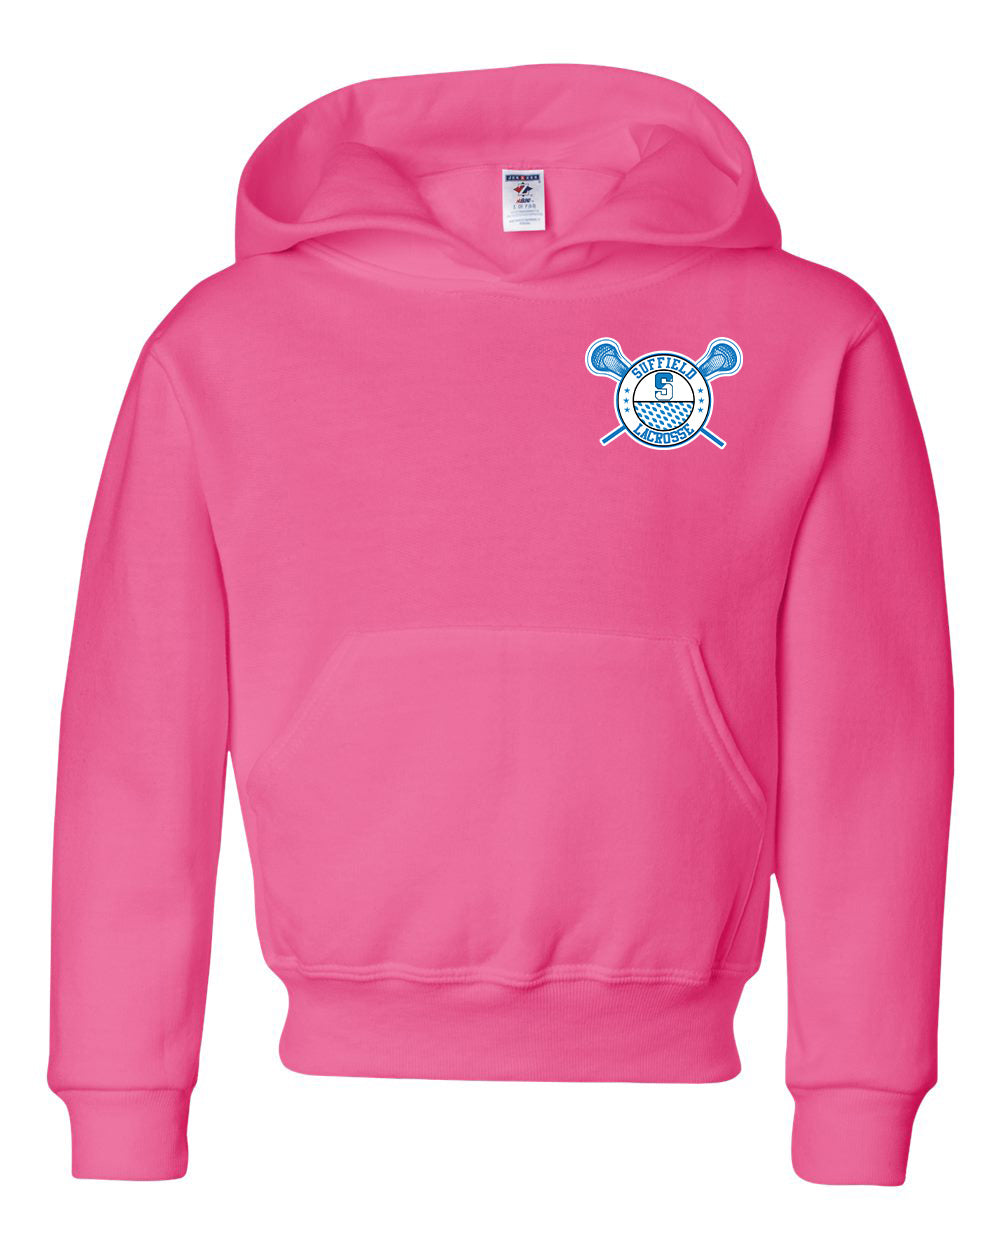 Suffield Youth Lacrosse Youth Hoodie "Circle Corner" - 996YR (color options available)